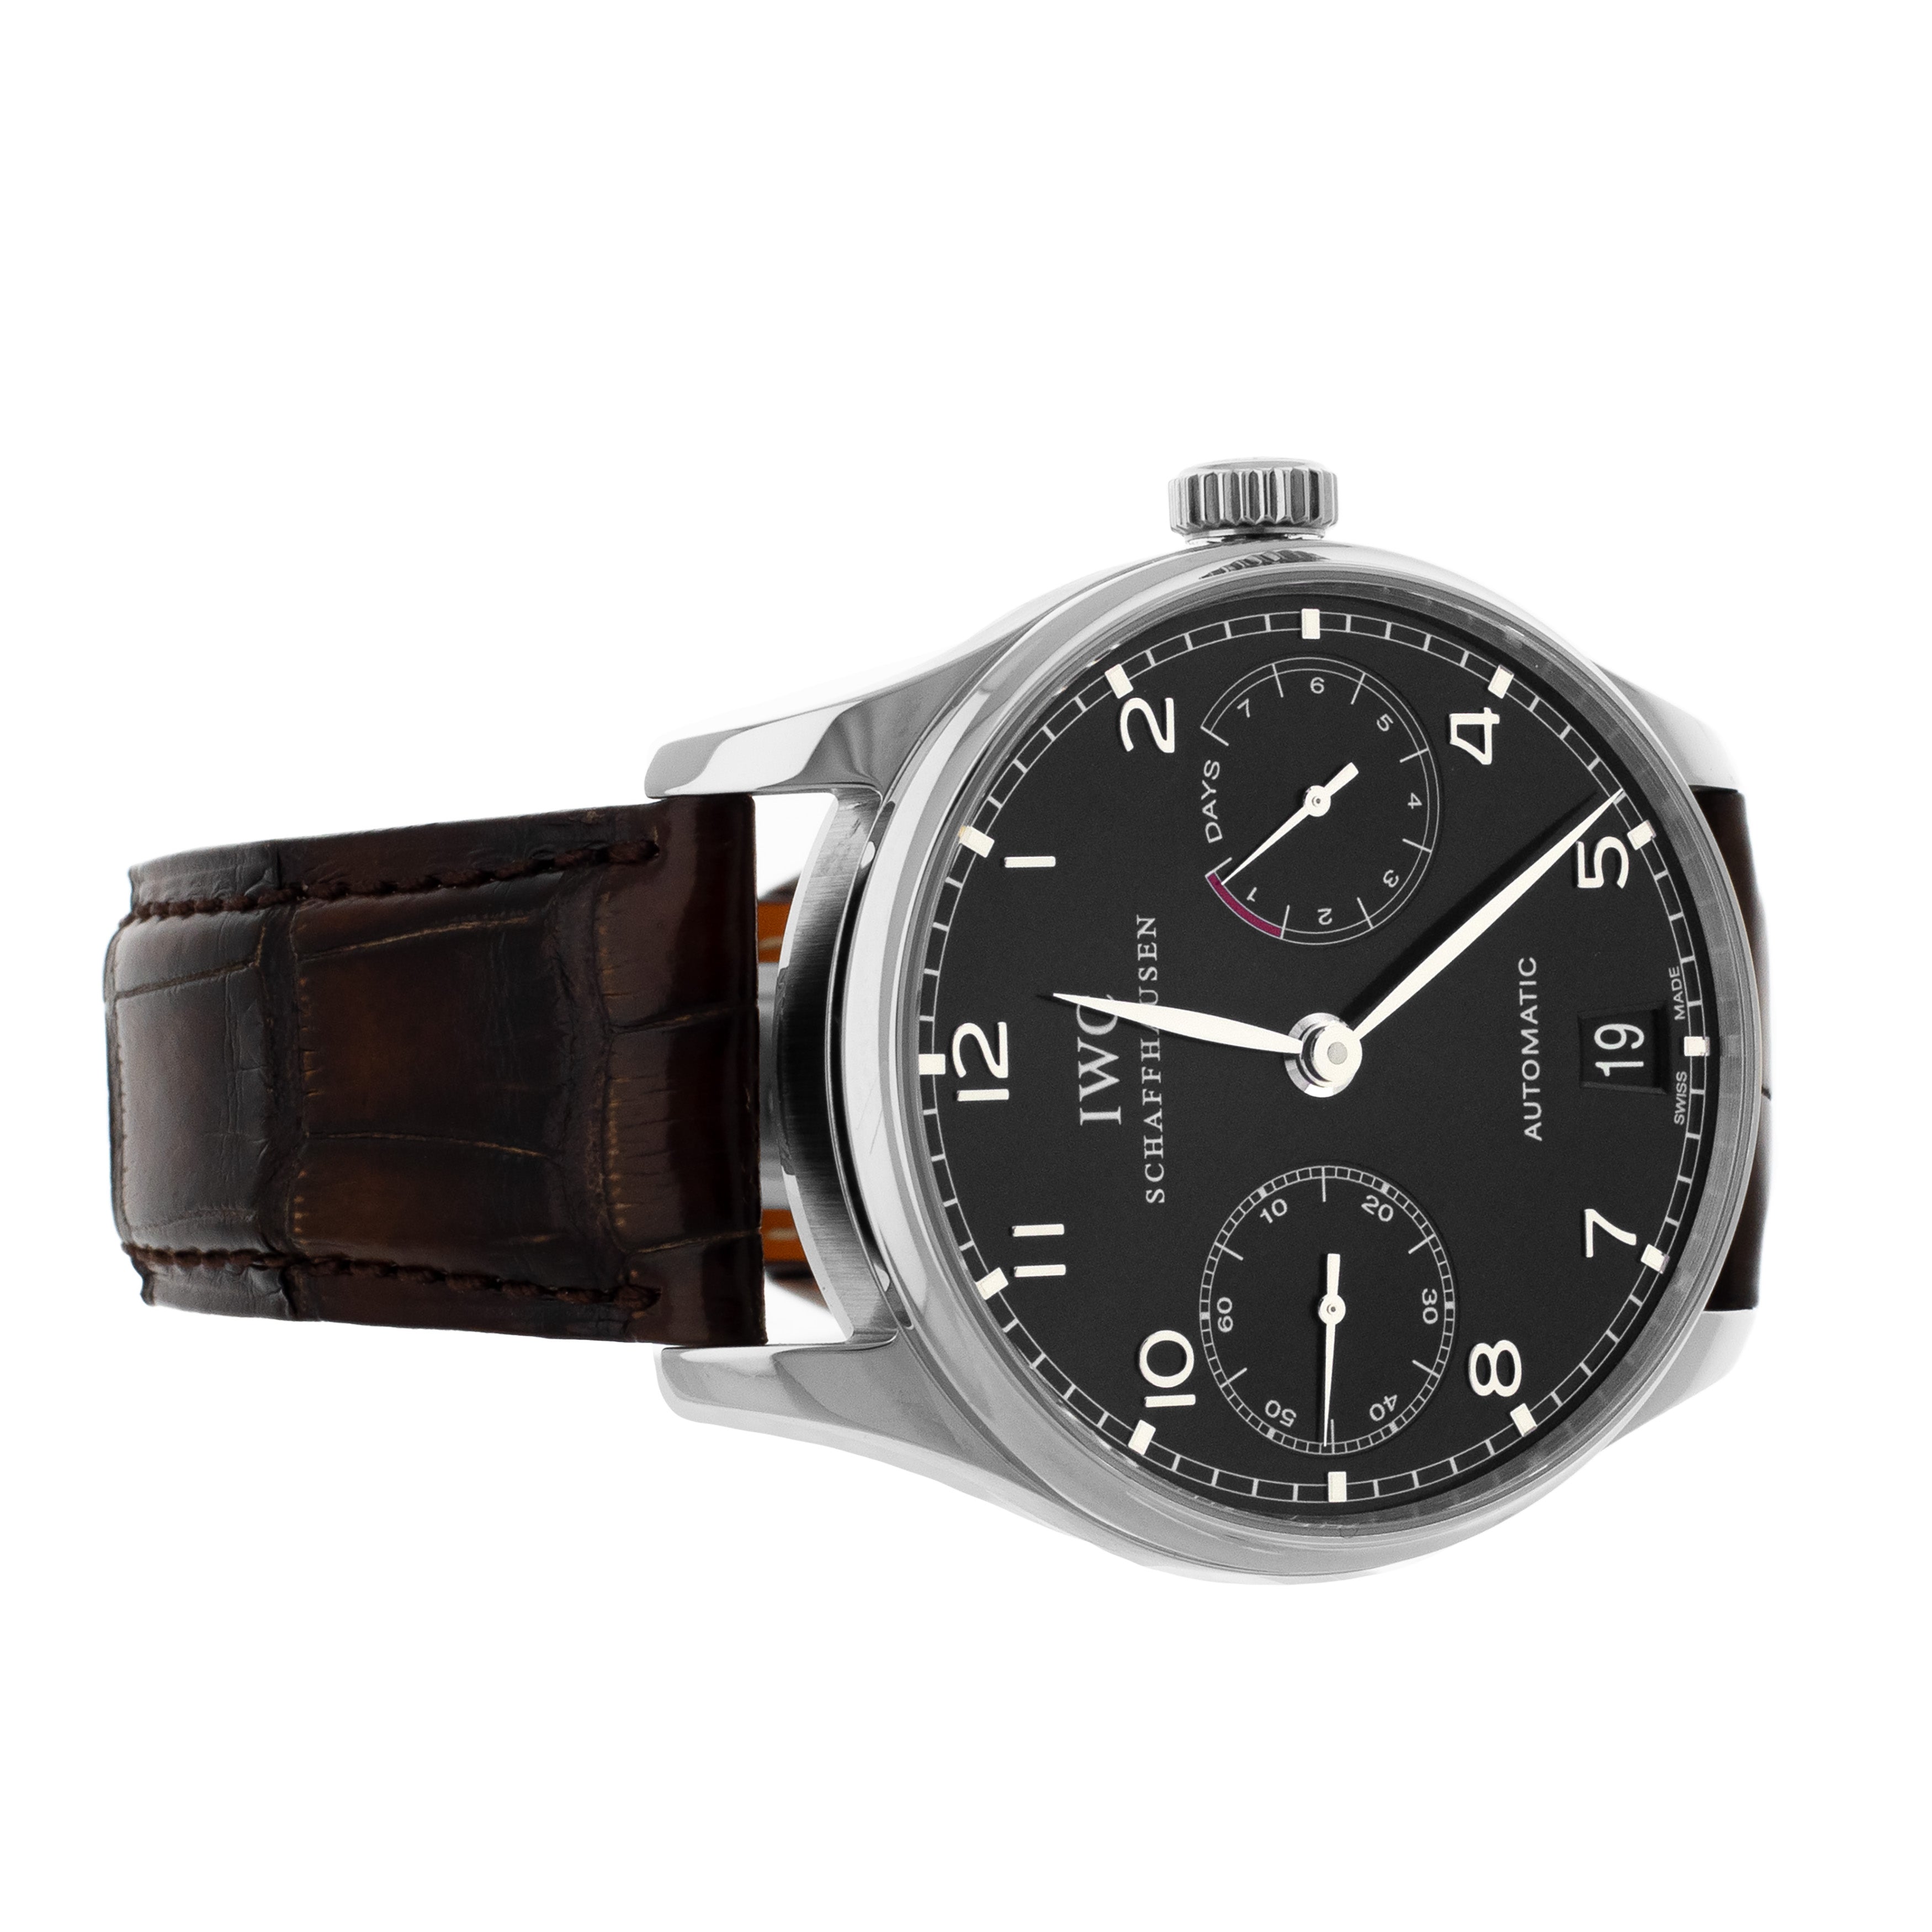 IWC Portugieser Automatic Stainless Steel Black Dial 42mm IW500109 Full Set